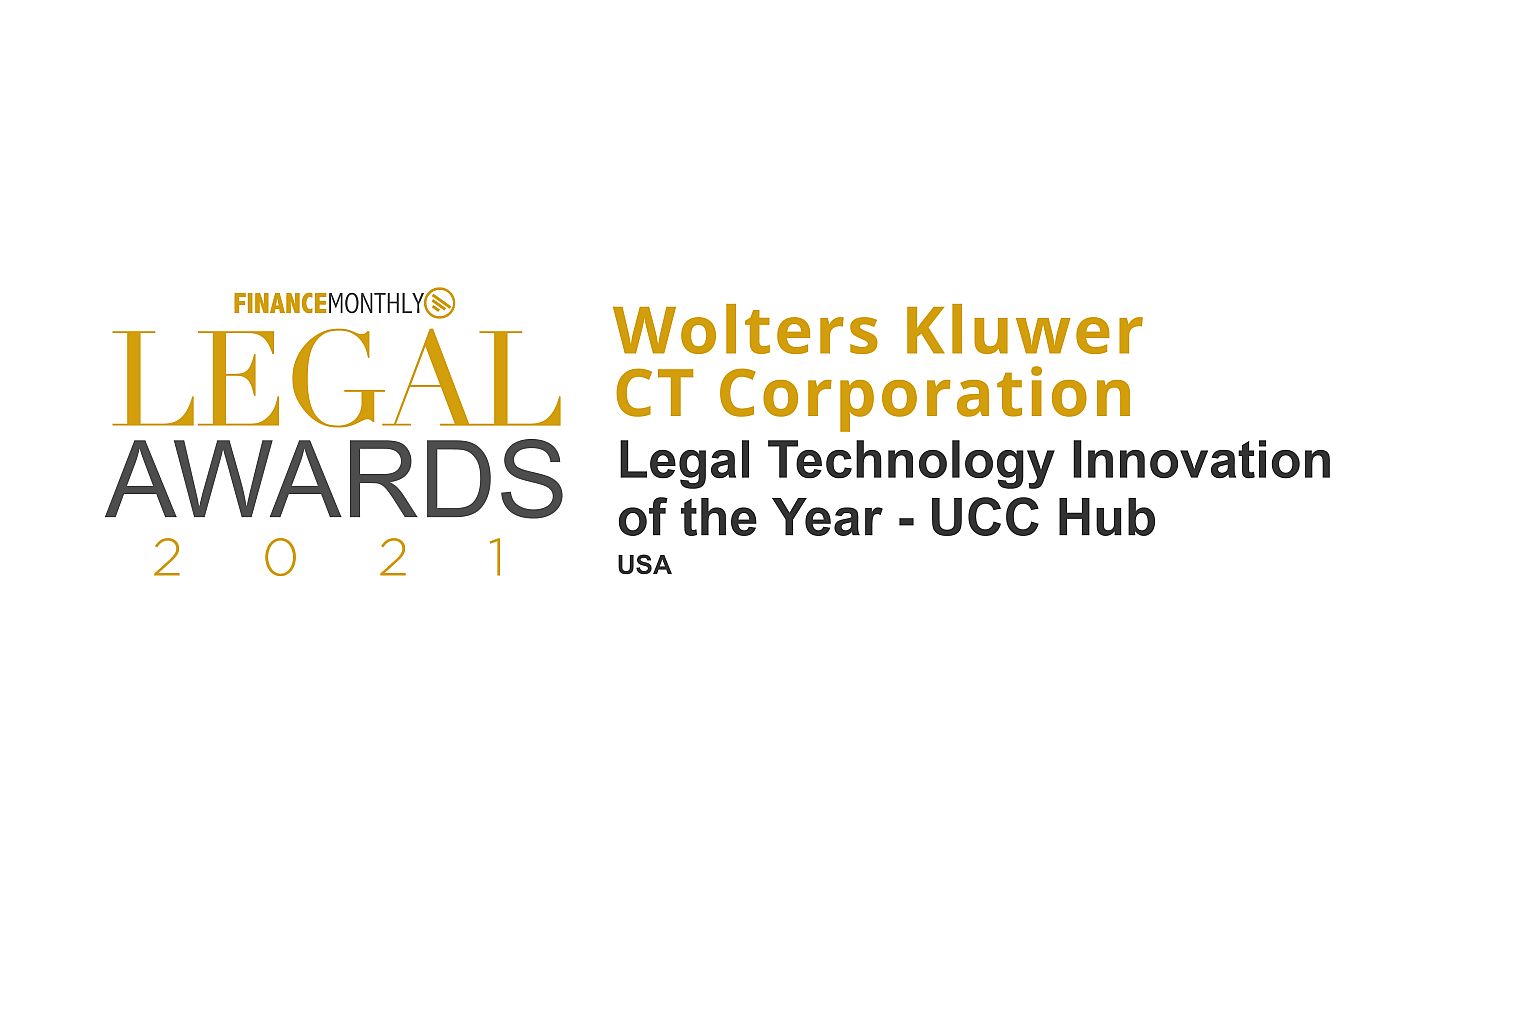 UCC Hub wins Legal Technology Innovation of the Year